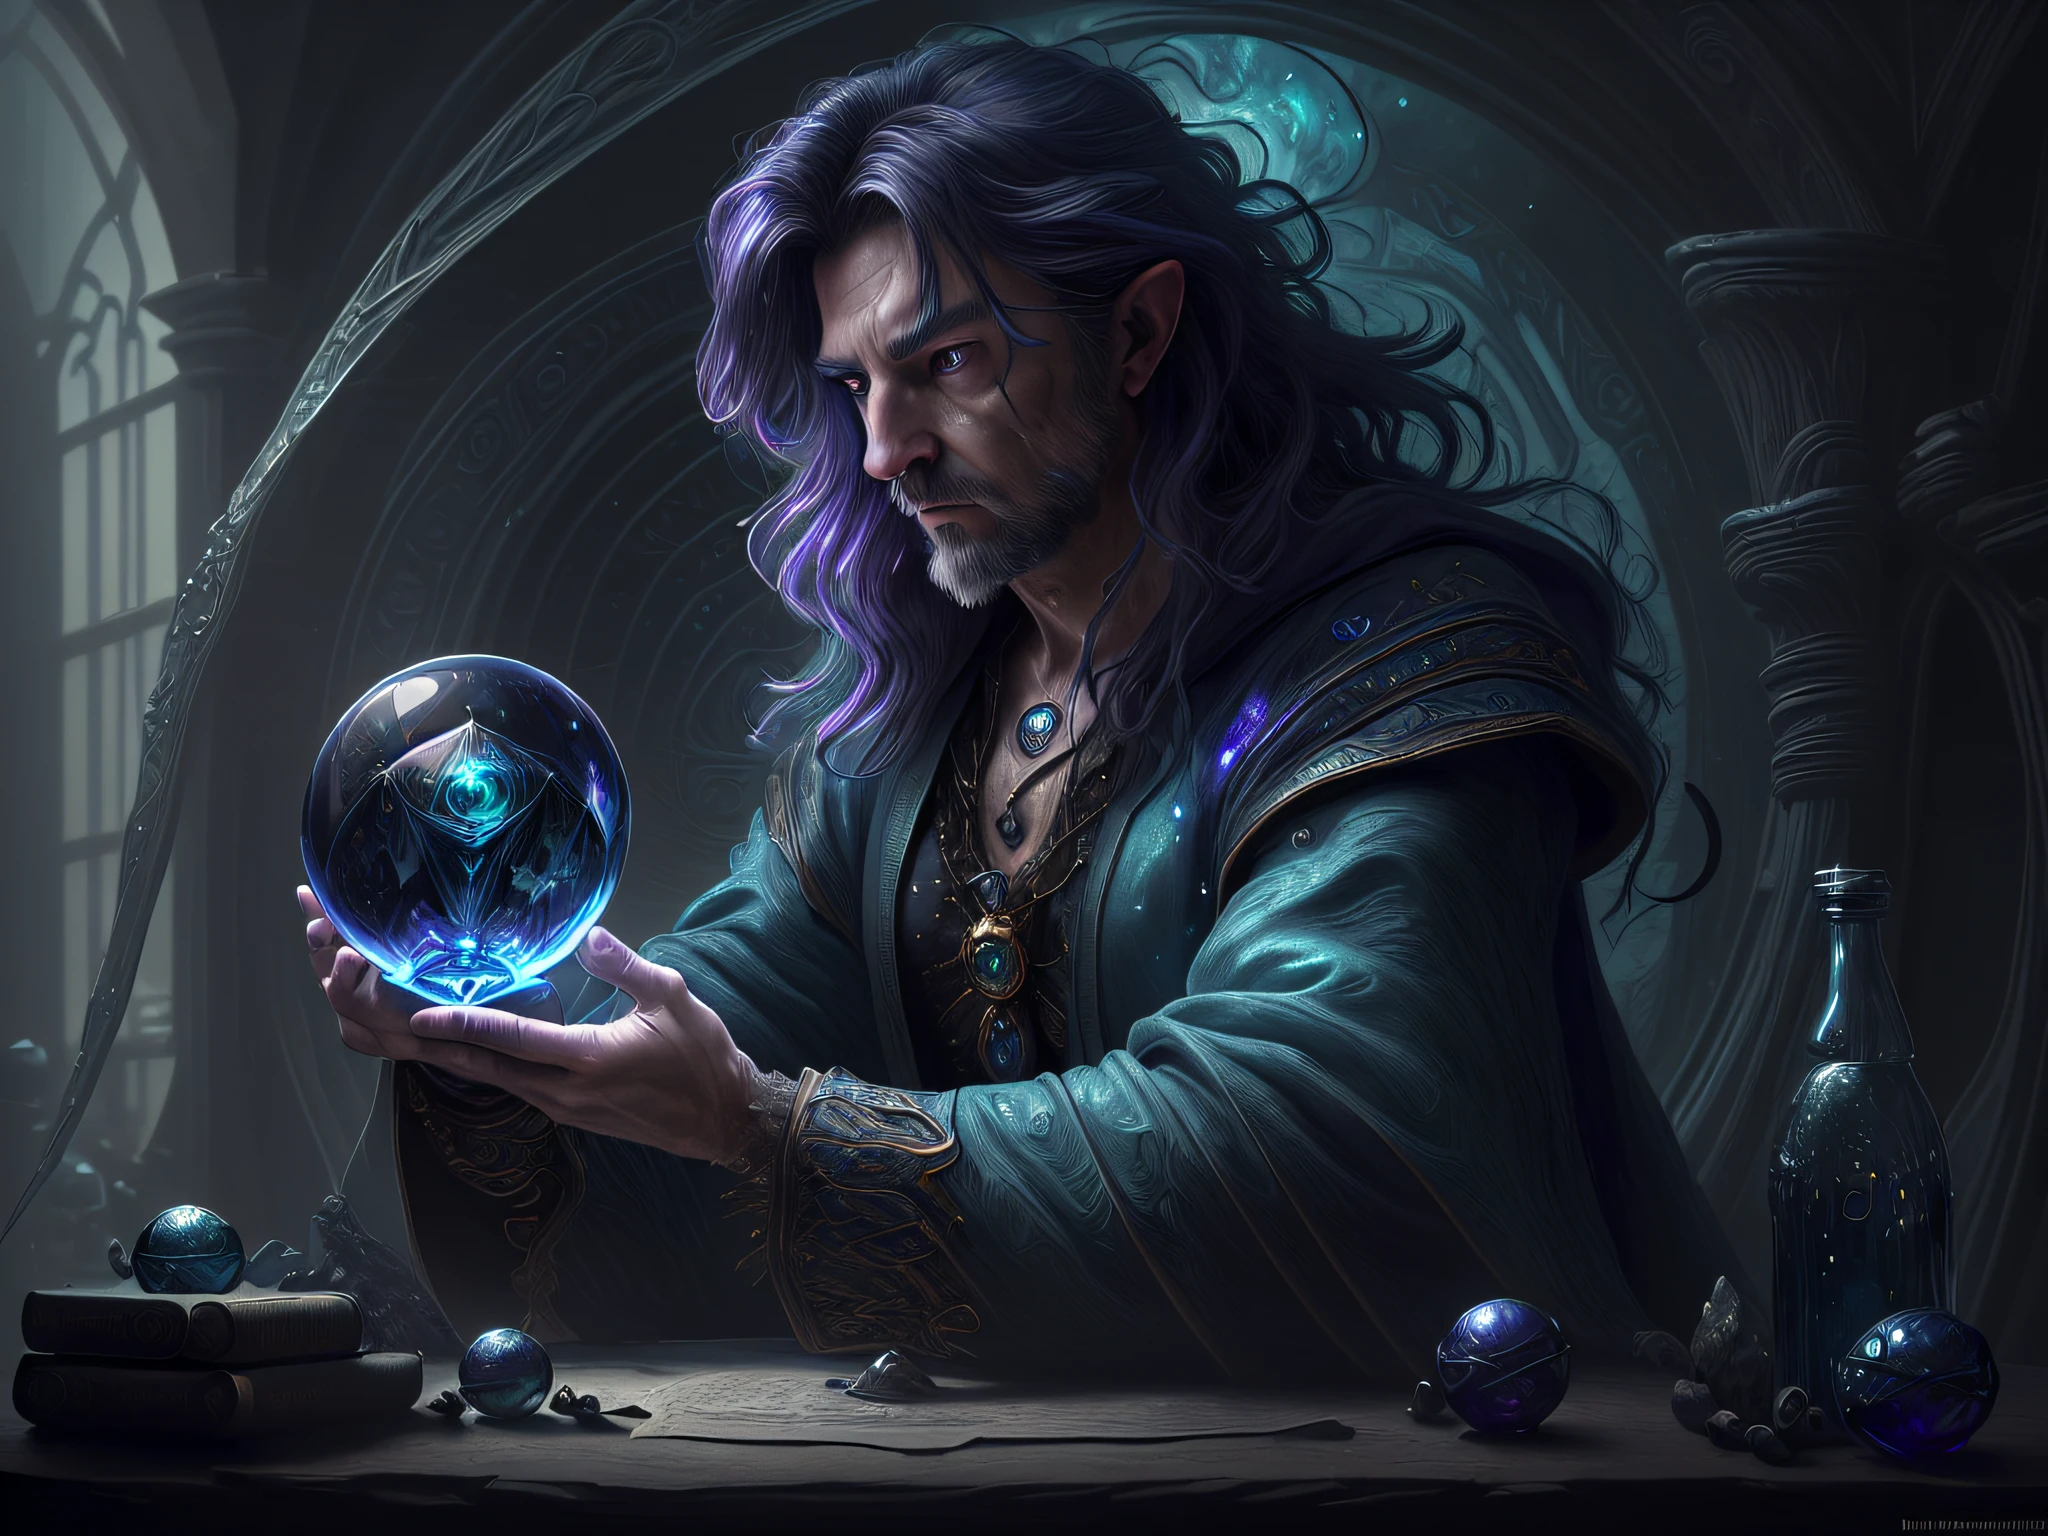 high details, best quality, 8k, [ultra detailed], masterpiece, best quality, (extremely detailed), dynamic angle, ultra wide shot, photorealistic, RAW, fantasy art, dnd art, fantasy art, realistic art, a wide angle view wallpaper of a wizard (intense details, Masterpiece, best quality: 1.5) looking into his cell phone divining  the future, (intense details, Masterpiece, best quality: 1.5), blue magical energy from the cell phone V0id3nergy  (intense details, Masterpiece, best quality: 1.5)  there is a crystal ball on the table human male wizard, fantasy wizard (intense details, Masterpiece, best quality: 1.5), D&D wizard, young human male (intense details, Masterpiece, best quality: 1.5), [[anatomically correct]], dynamic hair, dynamic eyes, wearing magical robe (intense details, Masterpiece, best quality: 1.5), dynamic colors, ultra detailed face (intense details, Masterpiece, best quality: 1.5), in his laboratory (intense details, Masterpiece, best quality: 1.5), many magical tomes, magical library (intense details, Masterpiece, best quality: 1.5), many magical vials, ultra wide angle from a medium distance